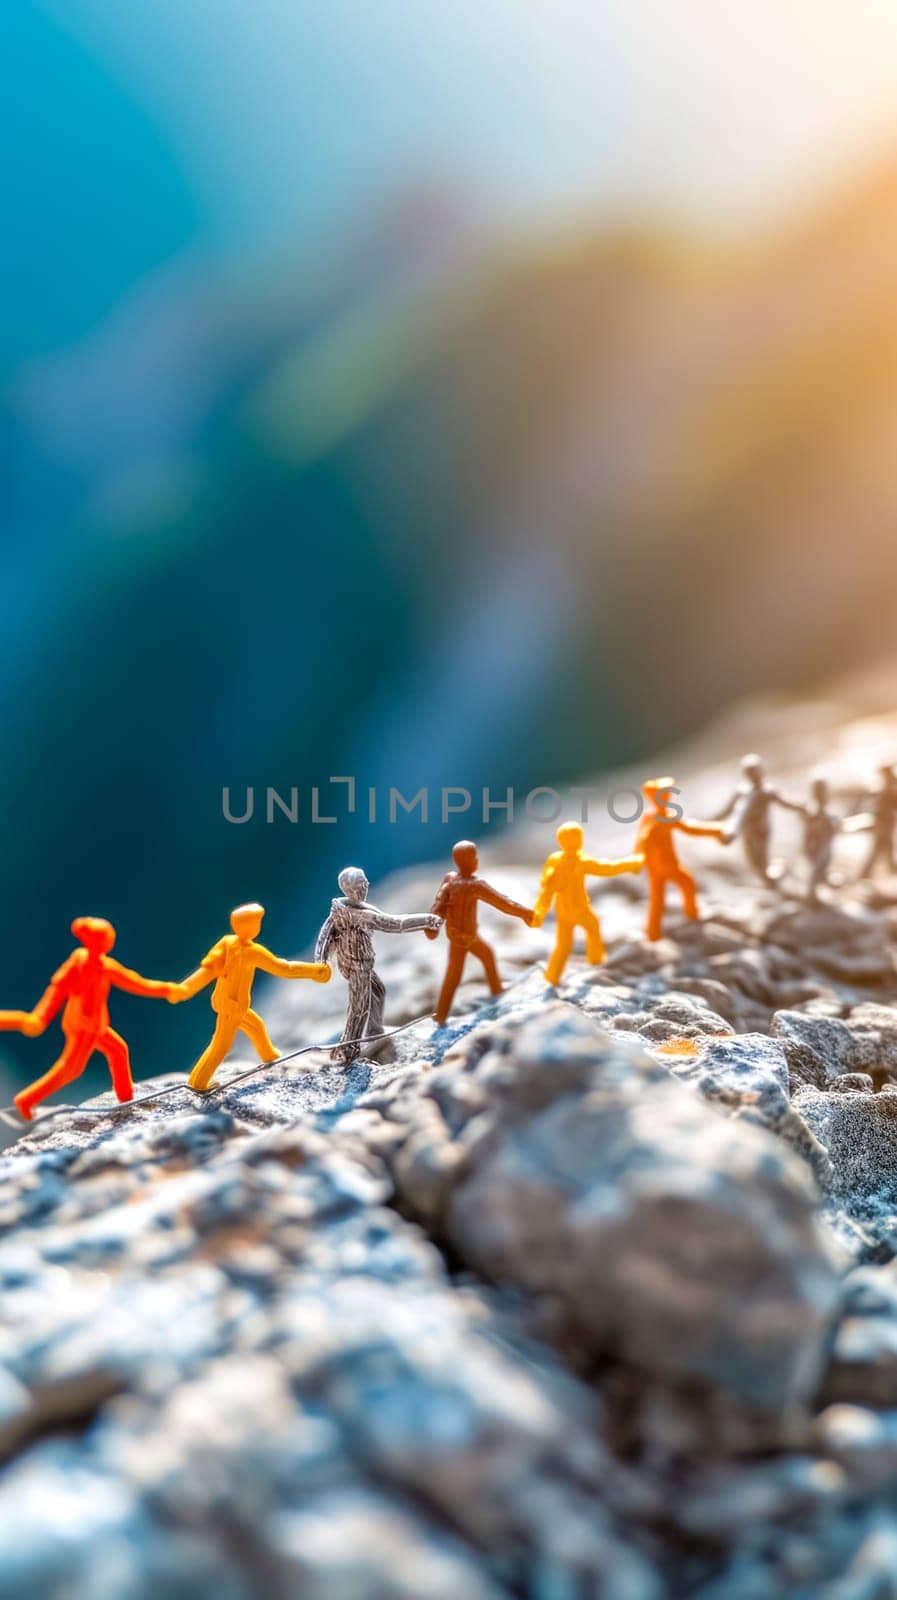 row of miniature figures in various colors holding hands atop a rugged terrain, symbolizing unity, teamwork, and cooperation against a blurred natural backdrop, illuminated by a soft light. by Edophoto